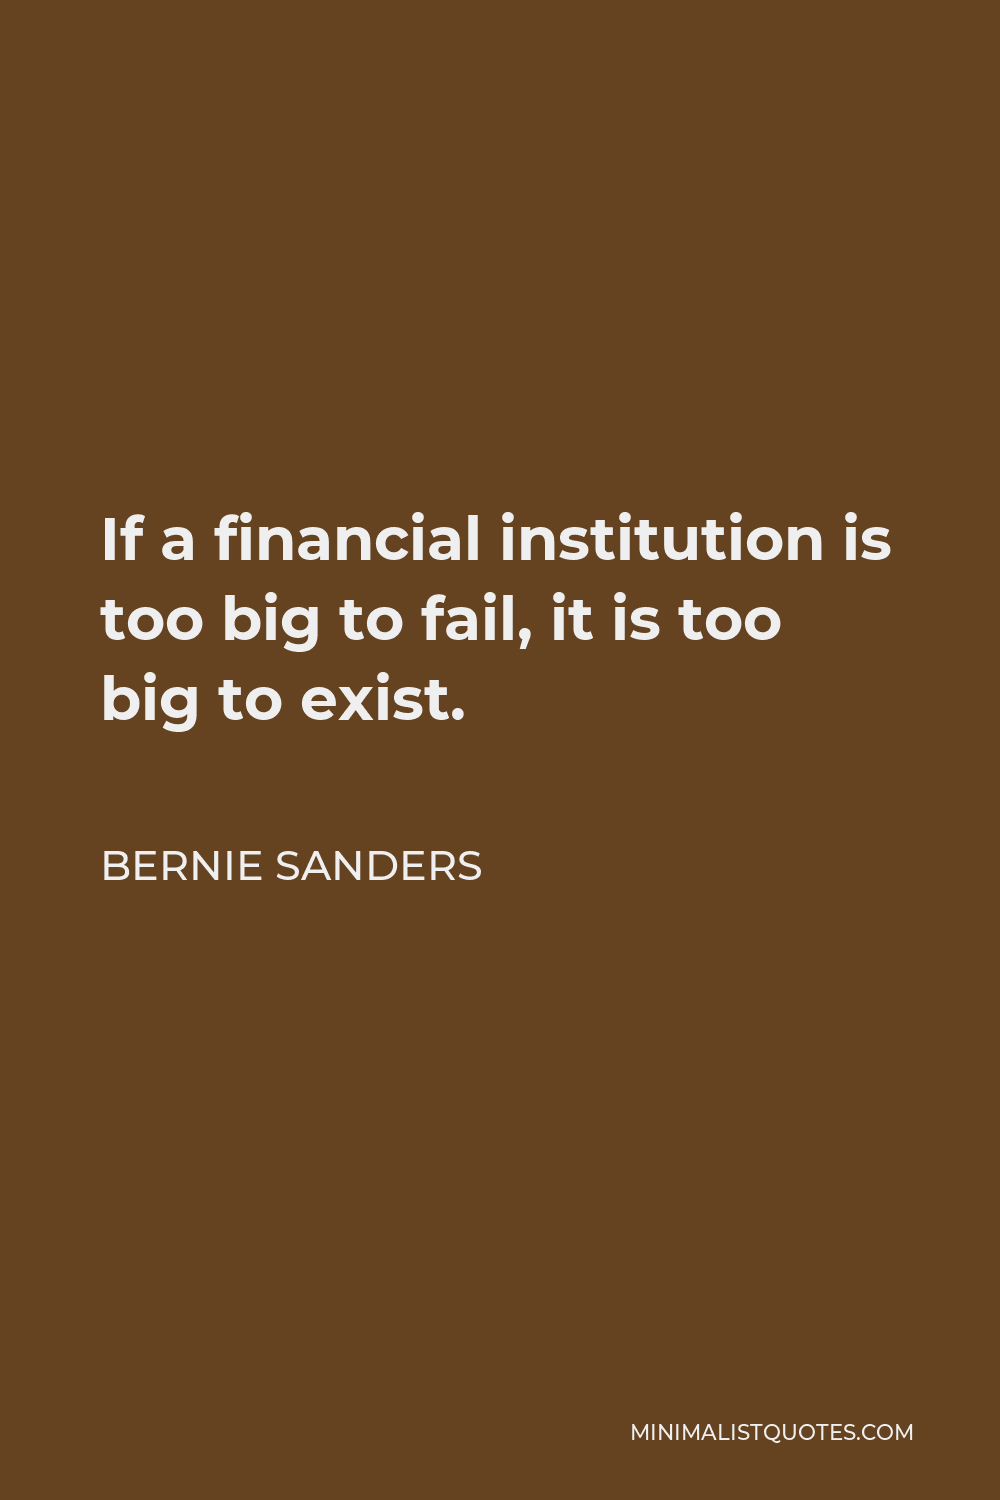 Bernie Sanders Quote - If a financial institution is too big to fail, it is too big to exist.